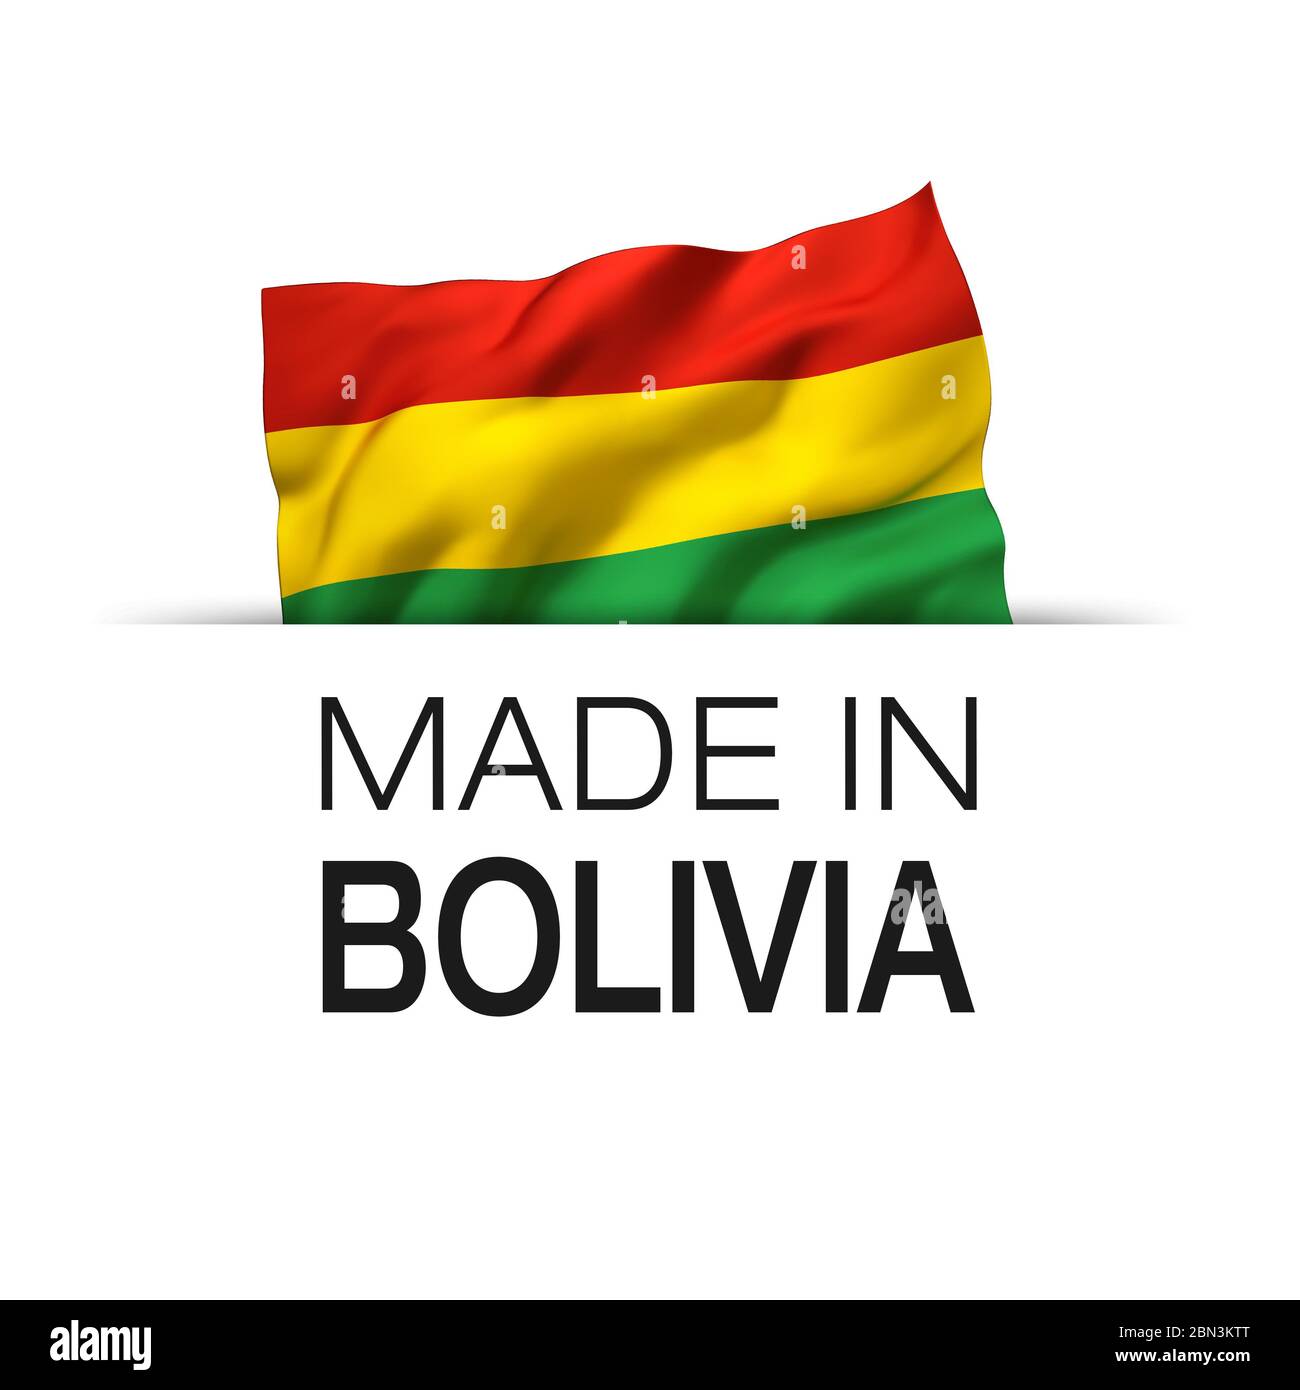 Made in Bolivia - Guarantee label with a waving Bolivian flag. 3D illustration. Stock Photo